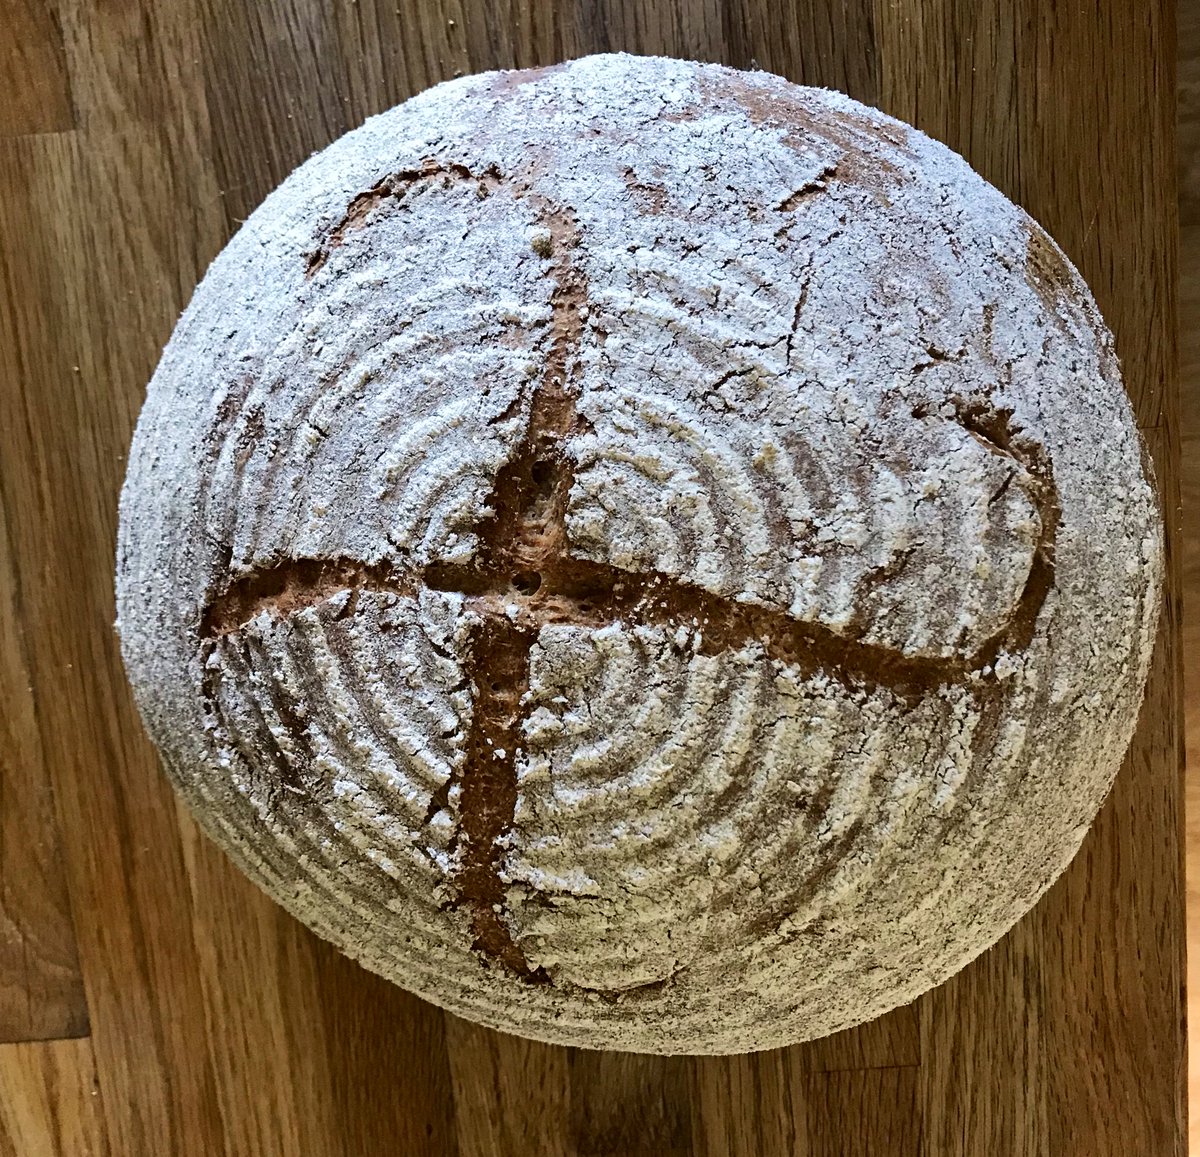 THE END. It worked, the bread is lovely, the oven pop was nuts, and the aroma is heavenly. This is 100% wholemeal local spelt on 100% wild local yeast, collected 6 days ago in a forest. This is ancient baking.   @ClubYeast  @Gilchesters